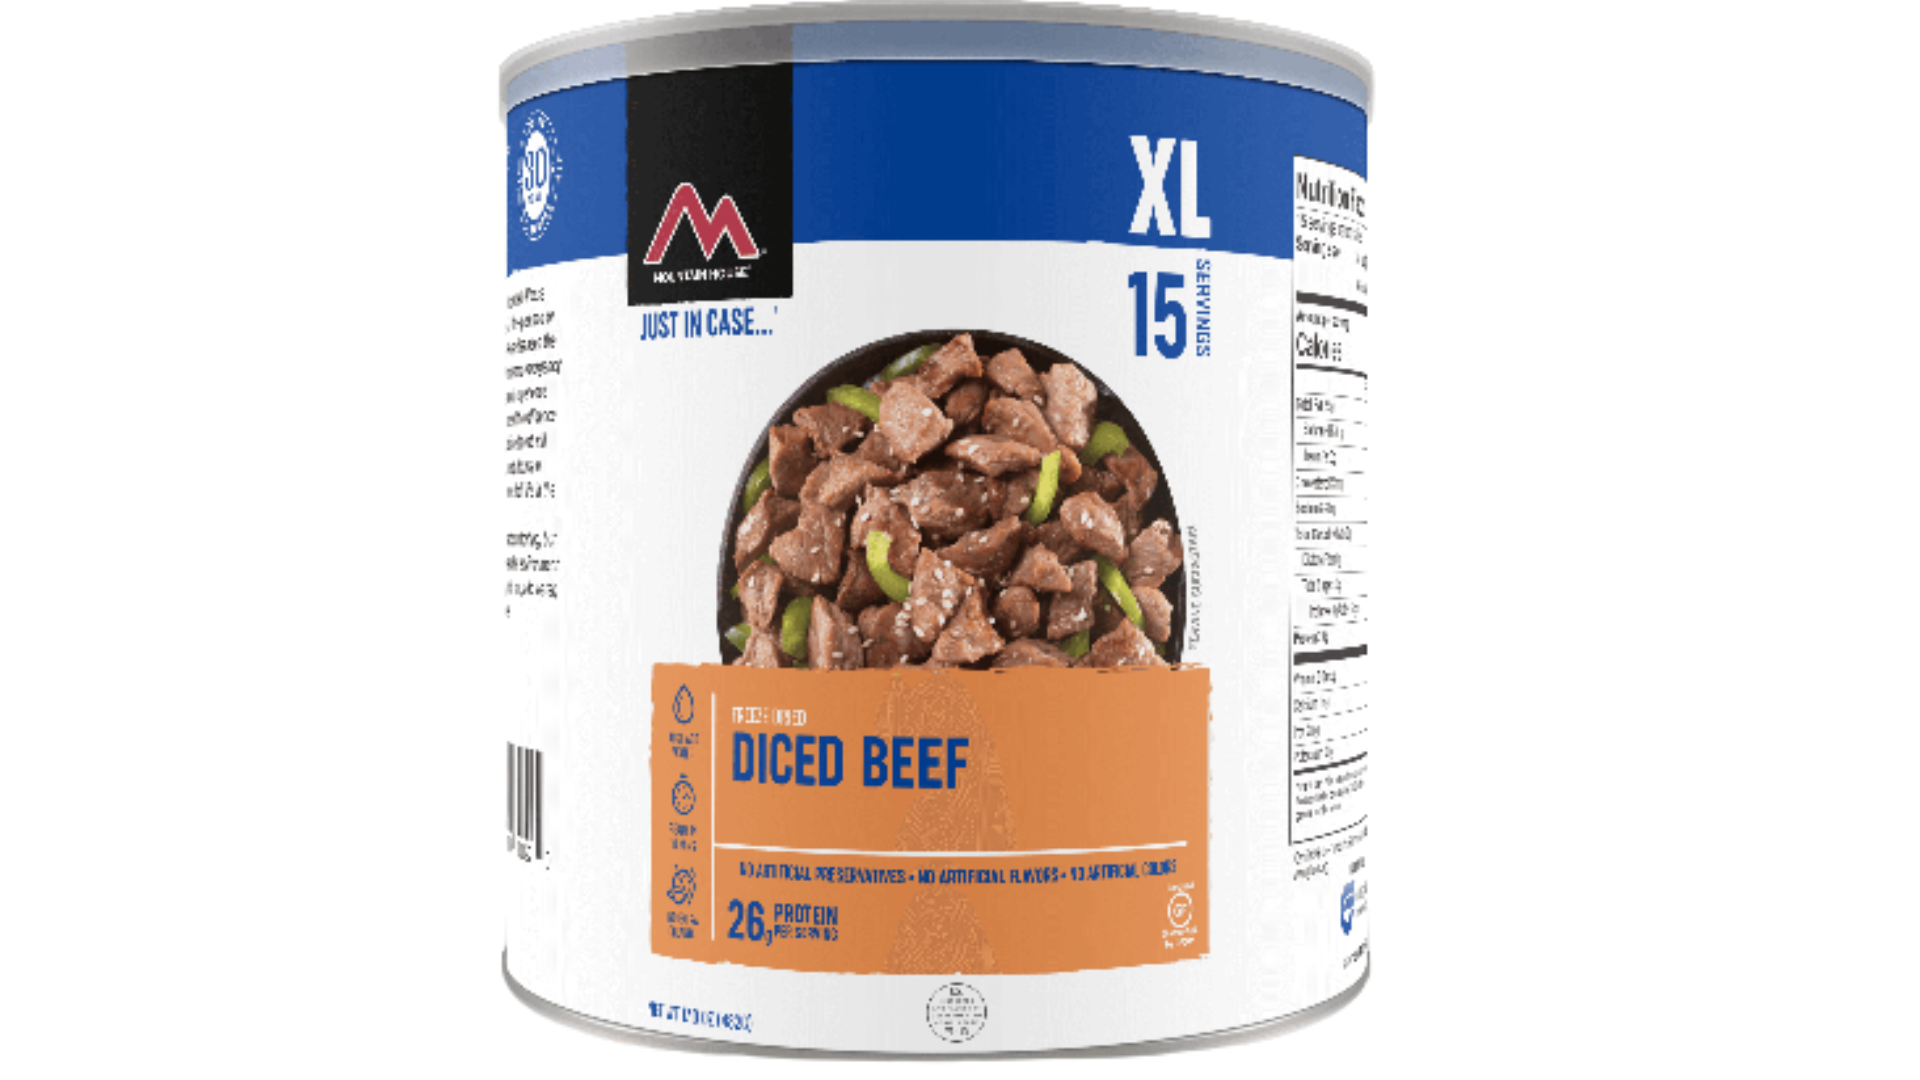 Diced beef (01 can) XL - 15 Servings